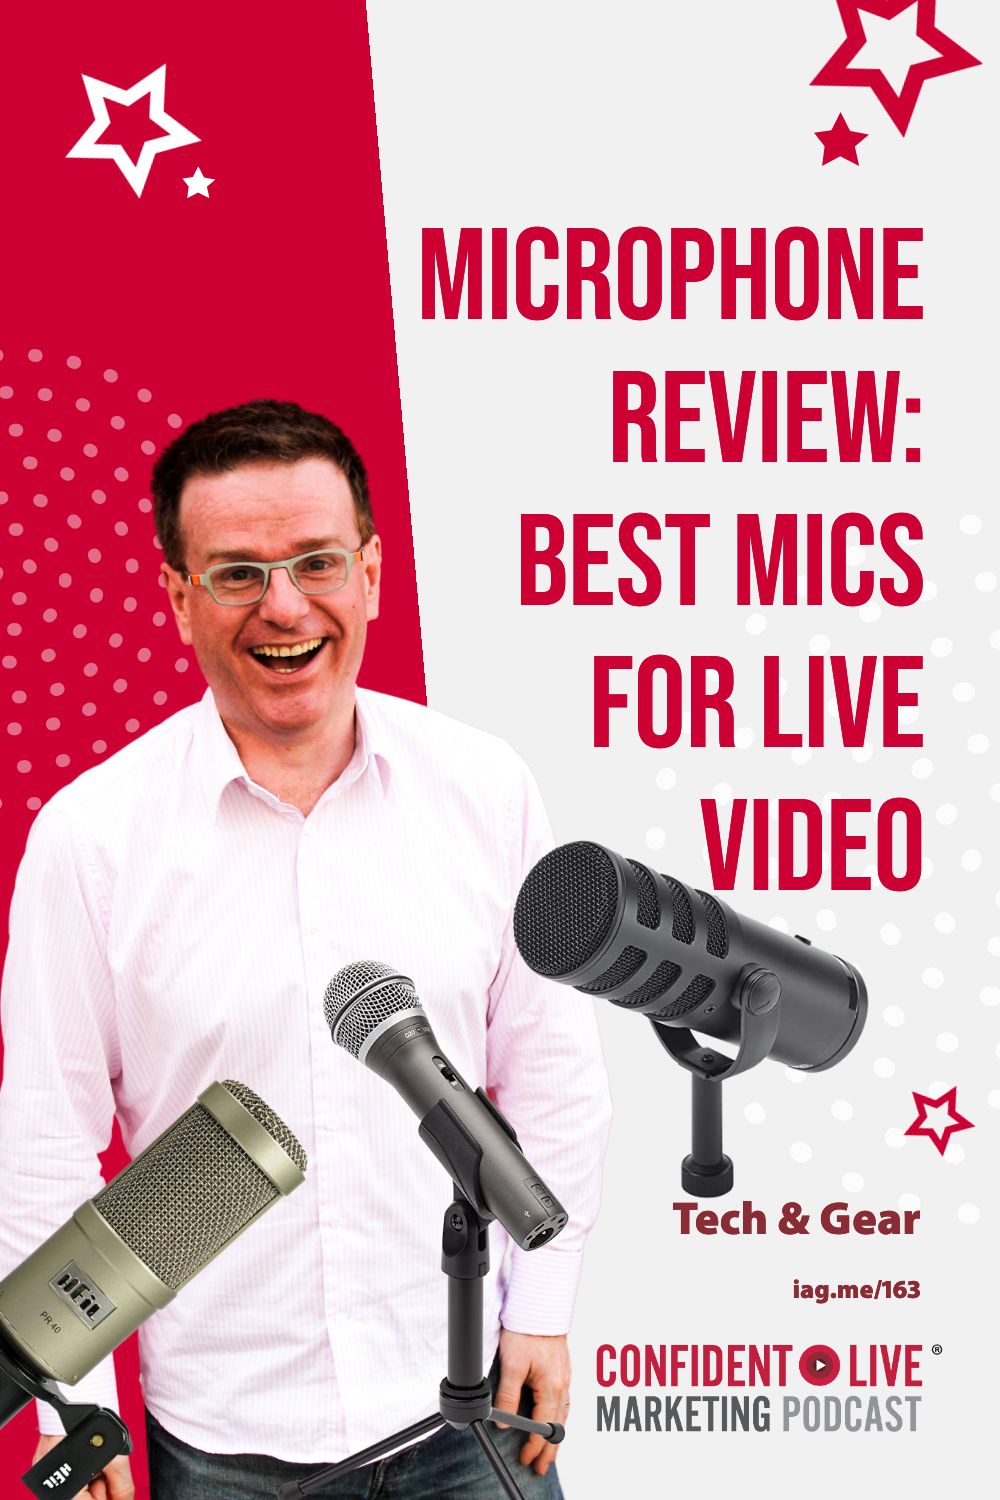 Microphone Review: Best Mics for Live Video